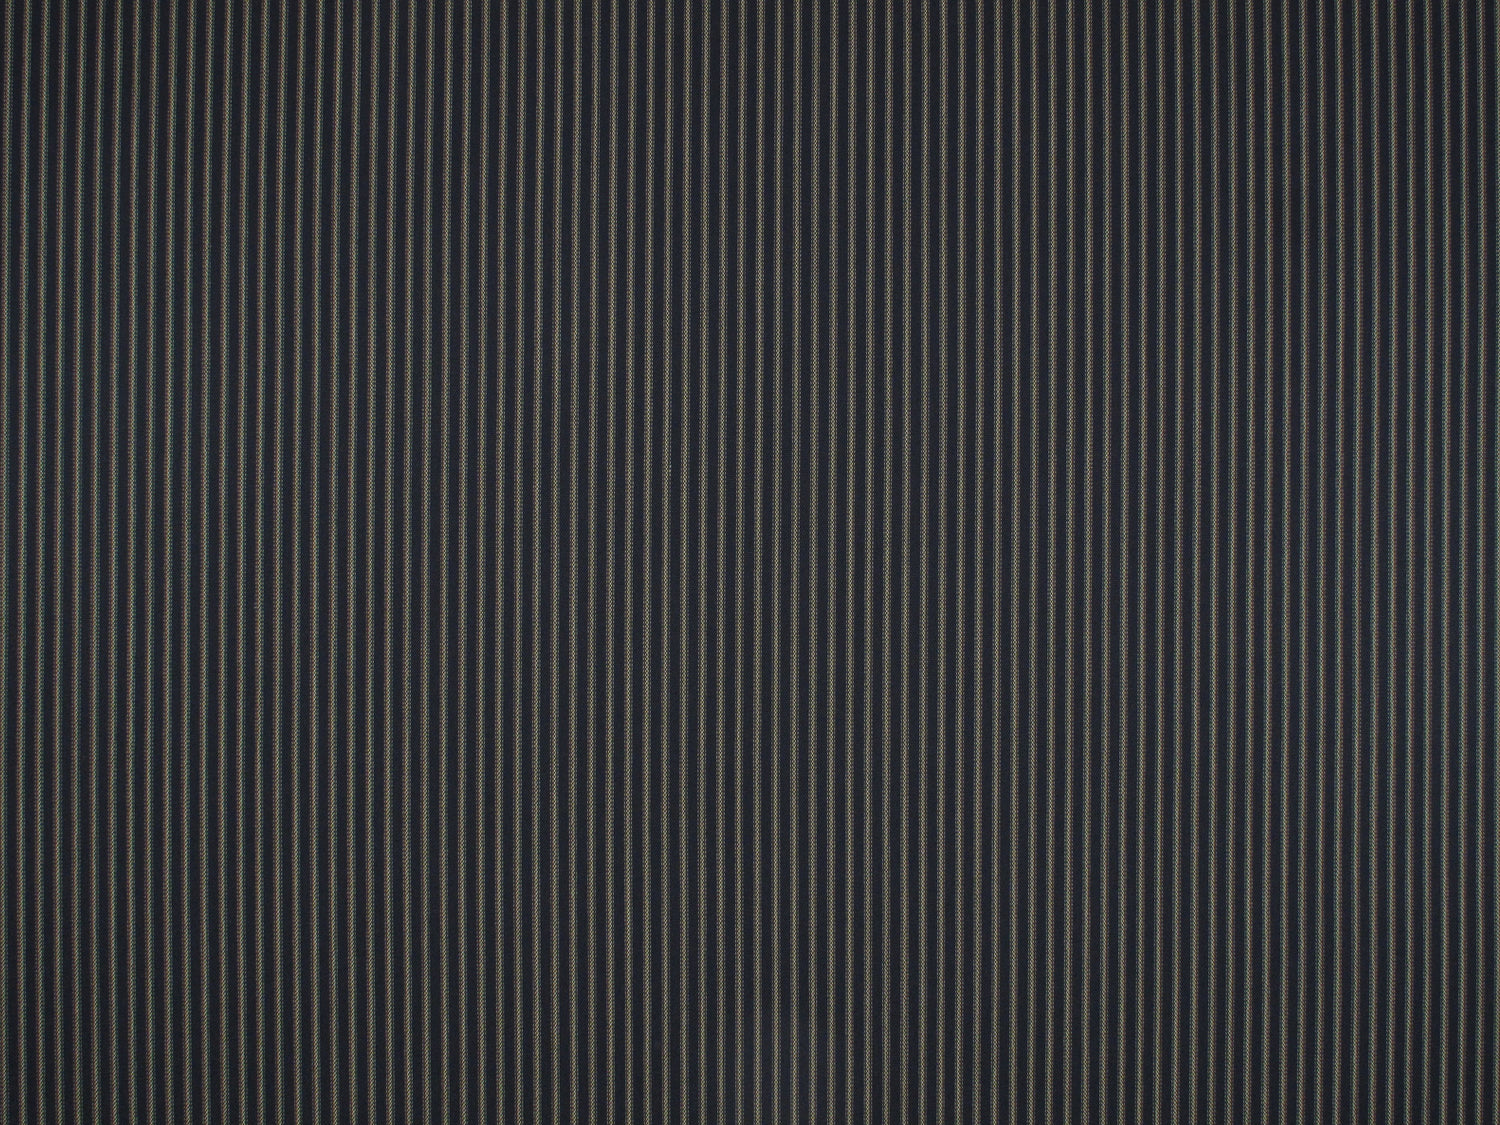 Buffalo Stripe fabric in navy camel color - pattern number SH 00041433 - by Scalamandre in the Old World Weavers collection